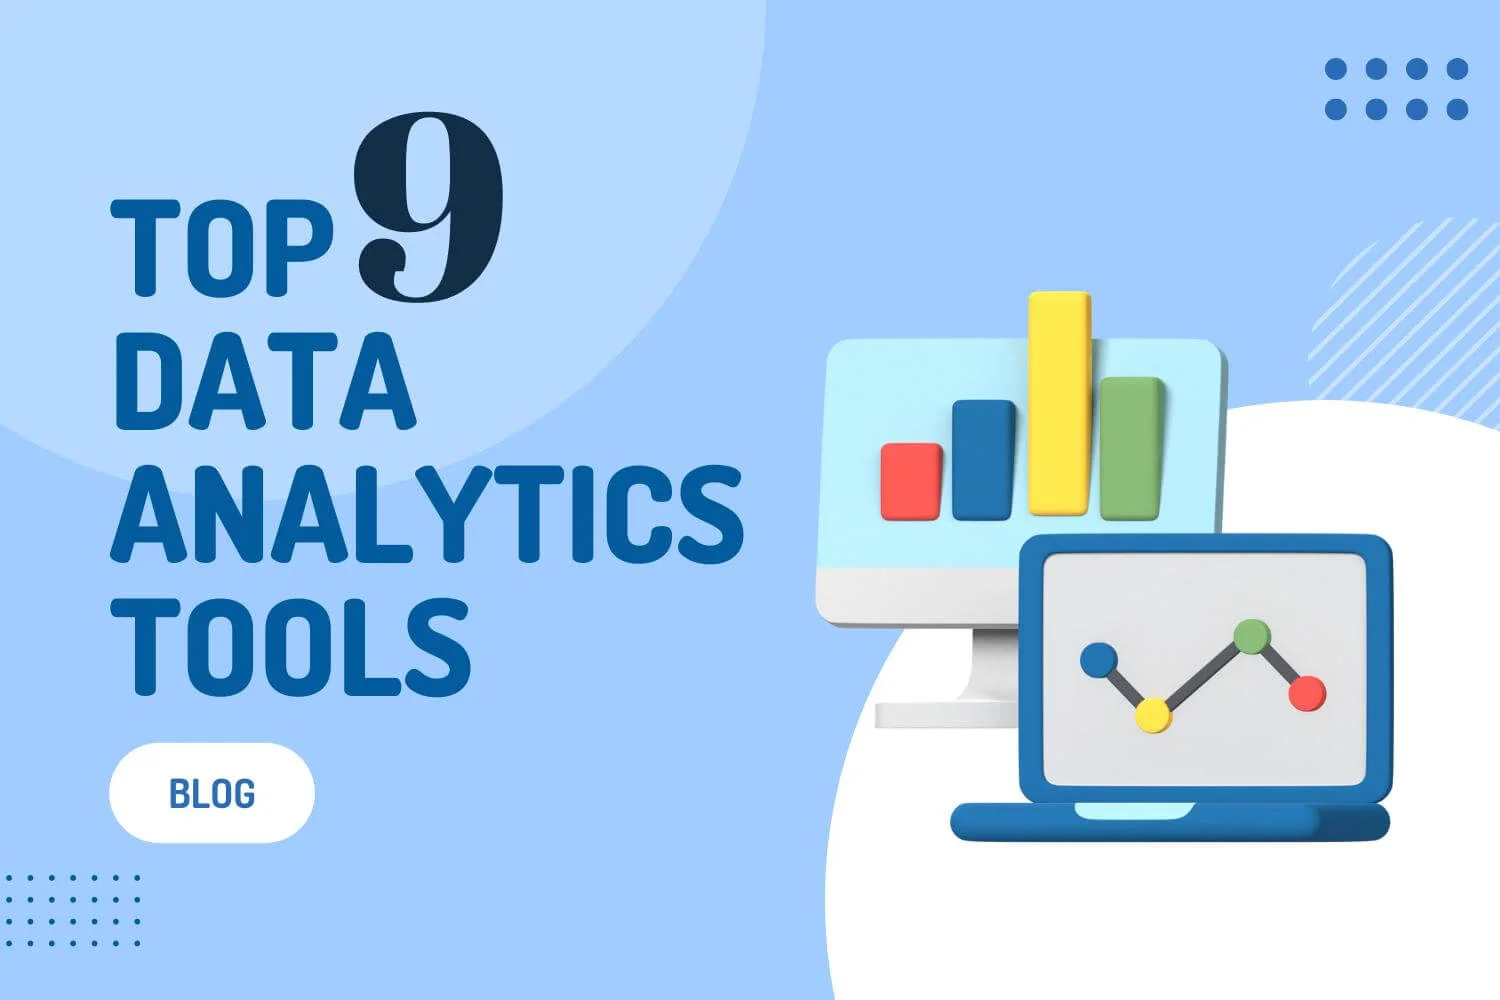 Top 9 Data Analytics Tools You Should Know About In 2023